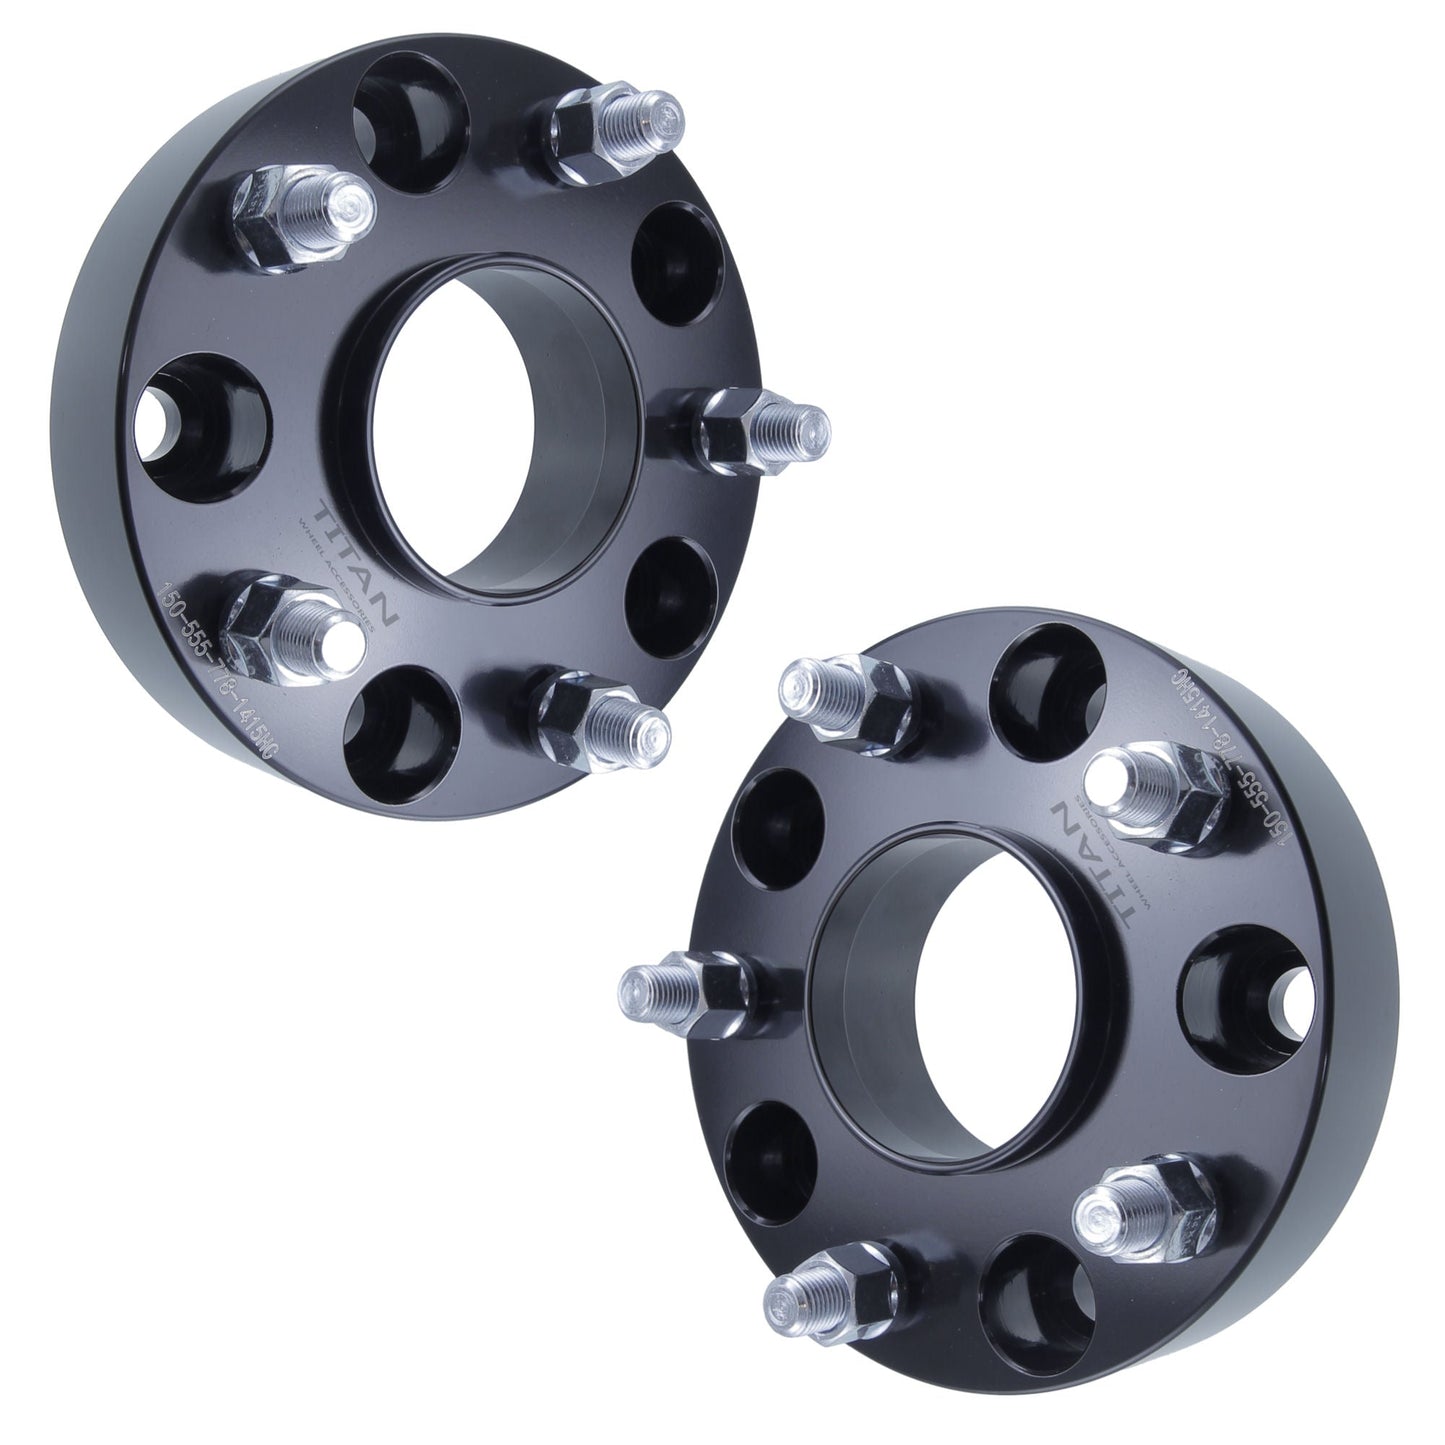 1.5" (38mm) Titan Wheel Spacers for Ram 1500 | 5x5.5 (5x139.7) | 77.8 Hubcentric |9/16 Studs |  Set of 4 | Titan Wheel Accessories